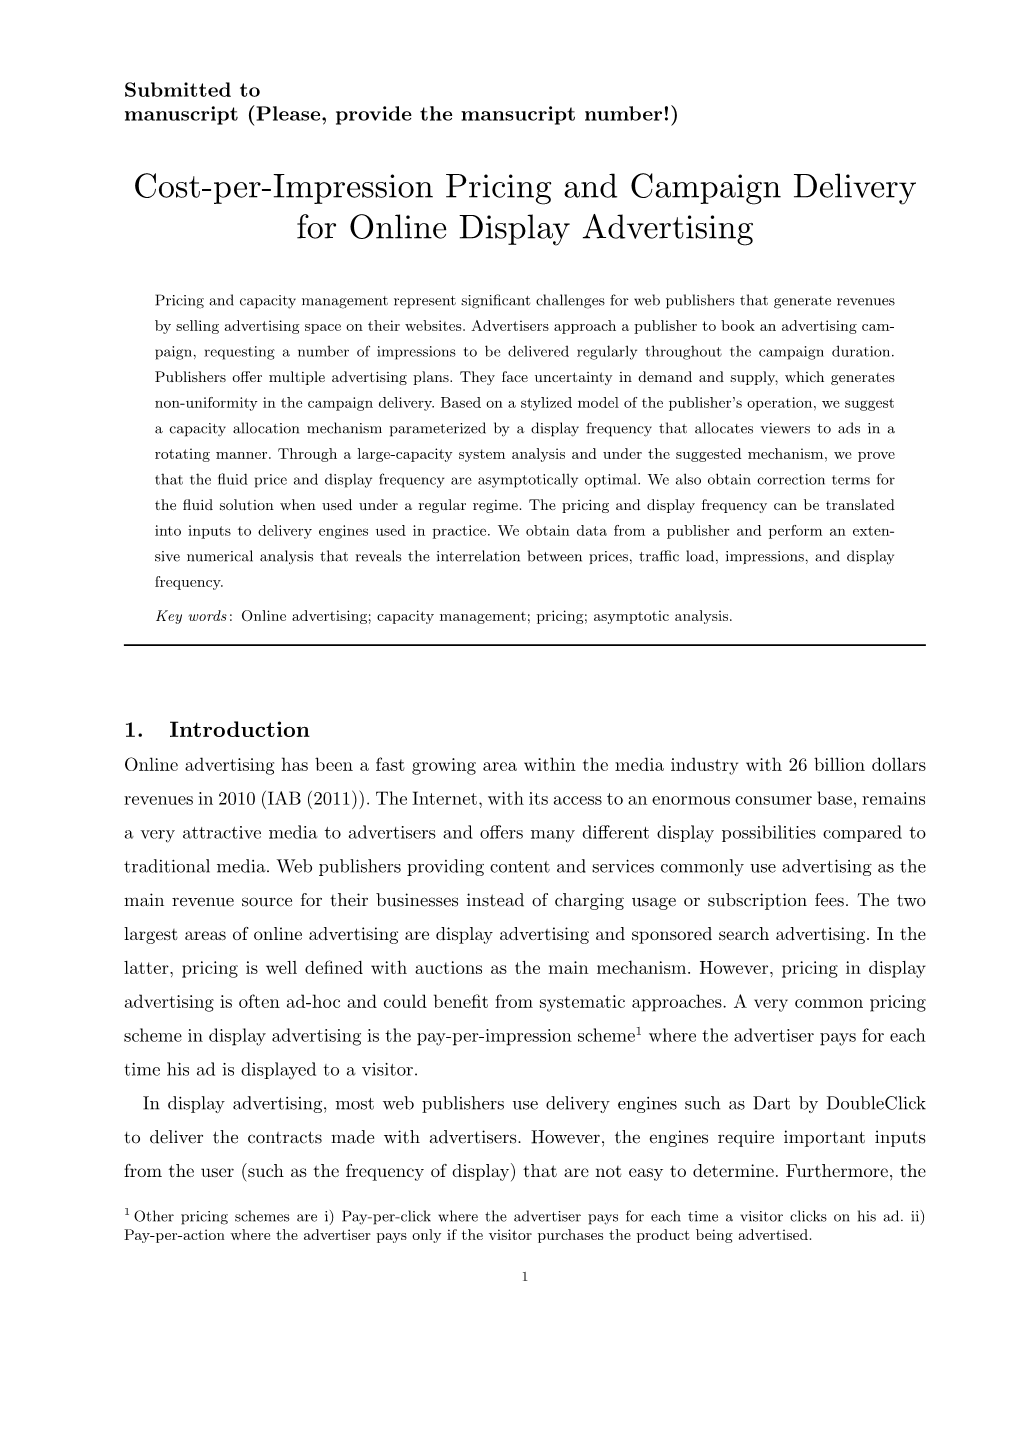 Cost-Per-Impression Pricing and Campaign Delivery for Online Display Advertising